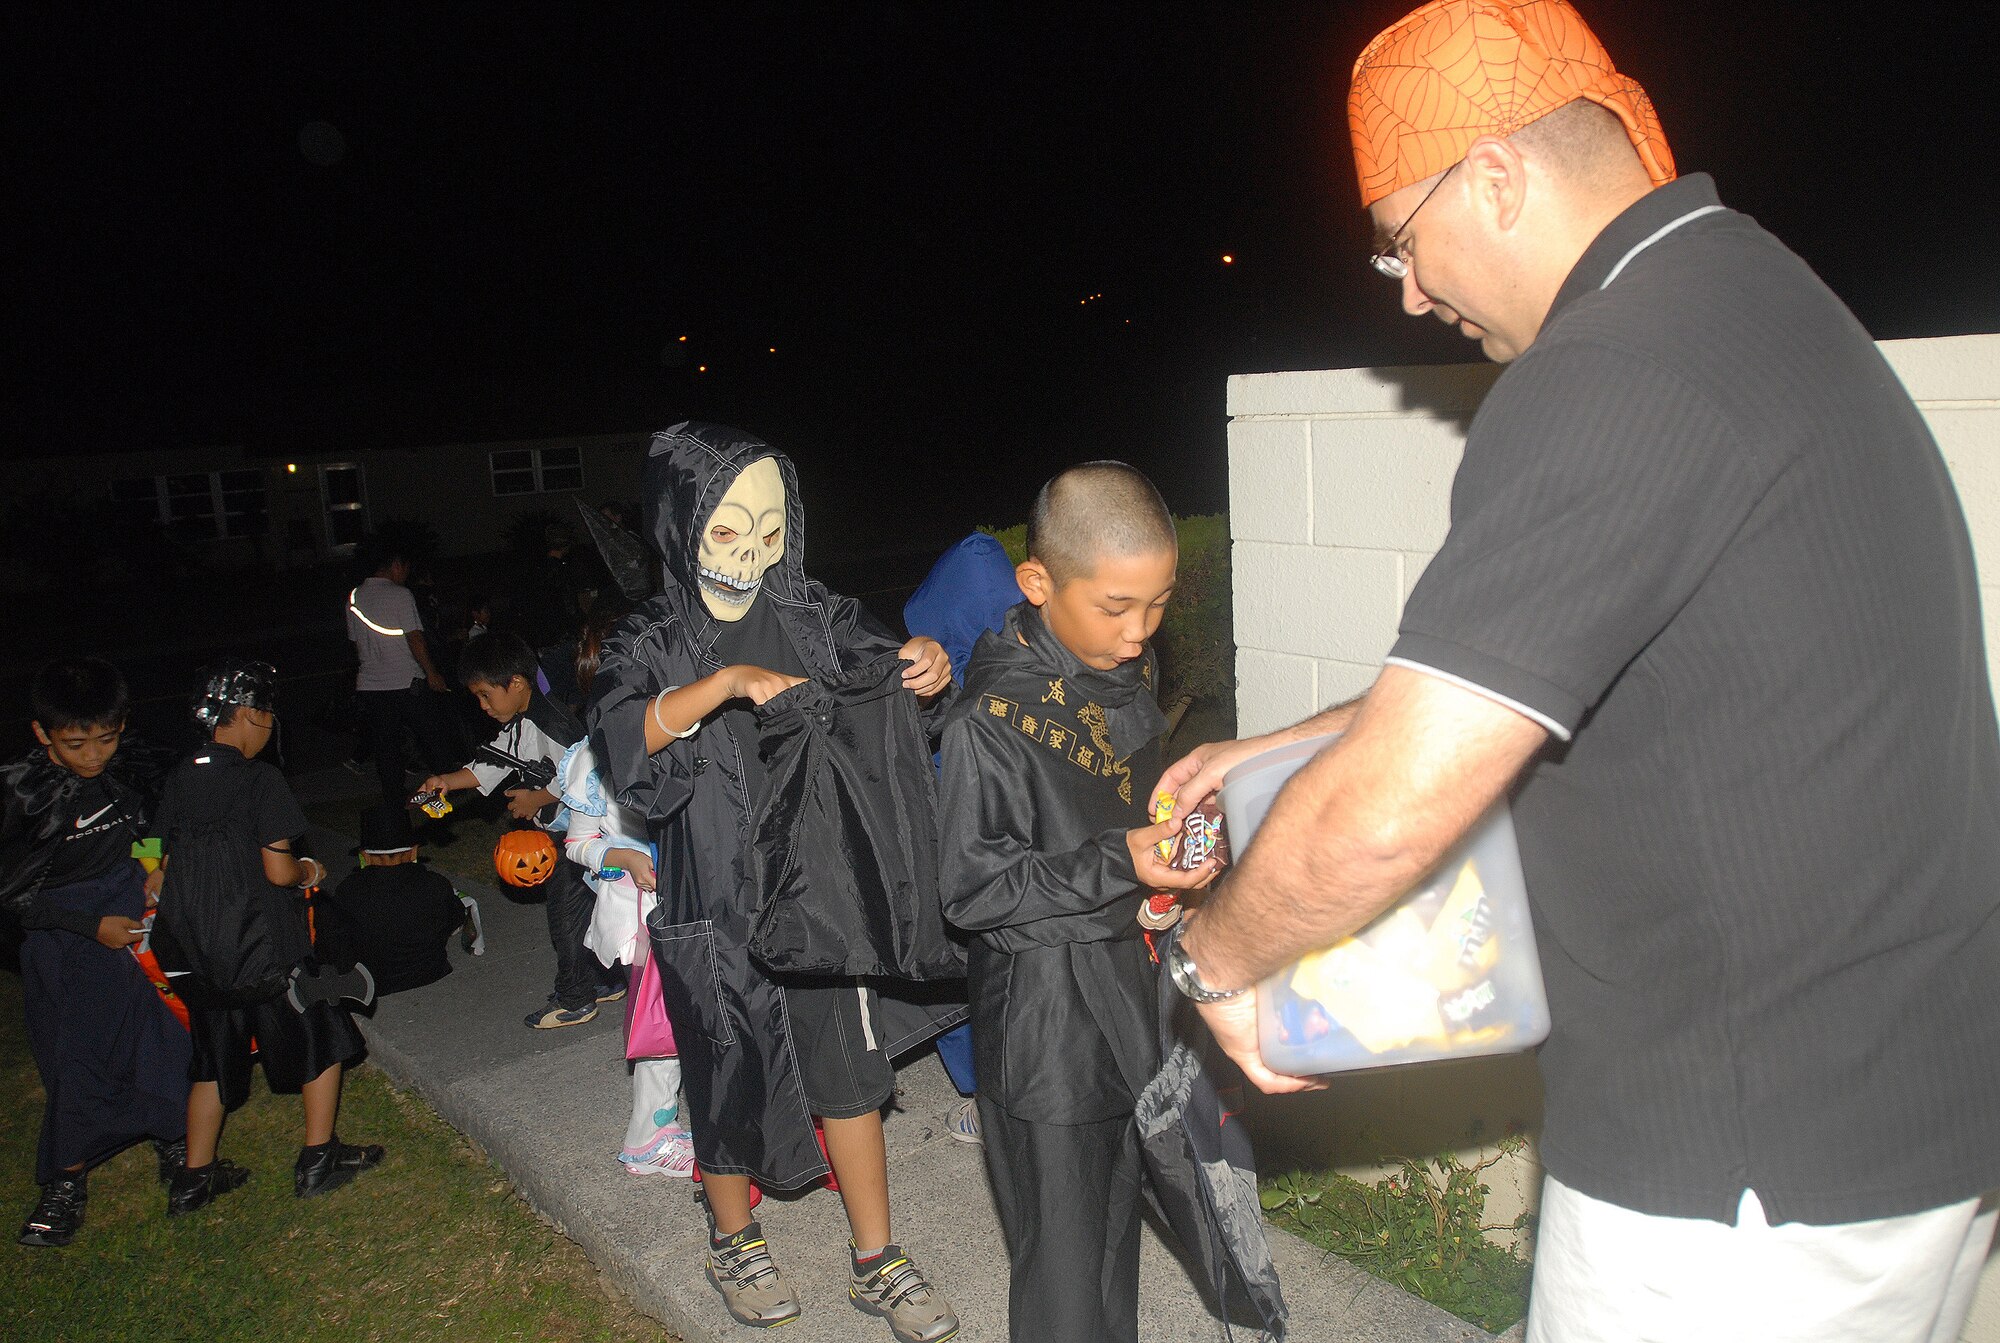 Okinawan children dressed as ghouls, ninjas and superheroes receive candy from a Kadena resident Oct. 31. SOFA-status personnel sponsored their Okinawan friends for an evening of trick-or-treating fun in Kadena housing areas. (U.S. Air Force official photo/Staff Sgt. Nestor Cruz)